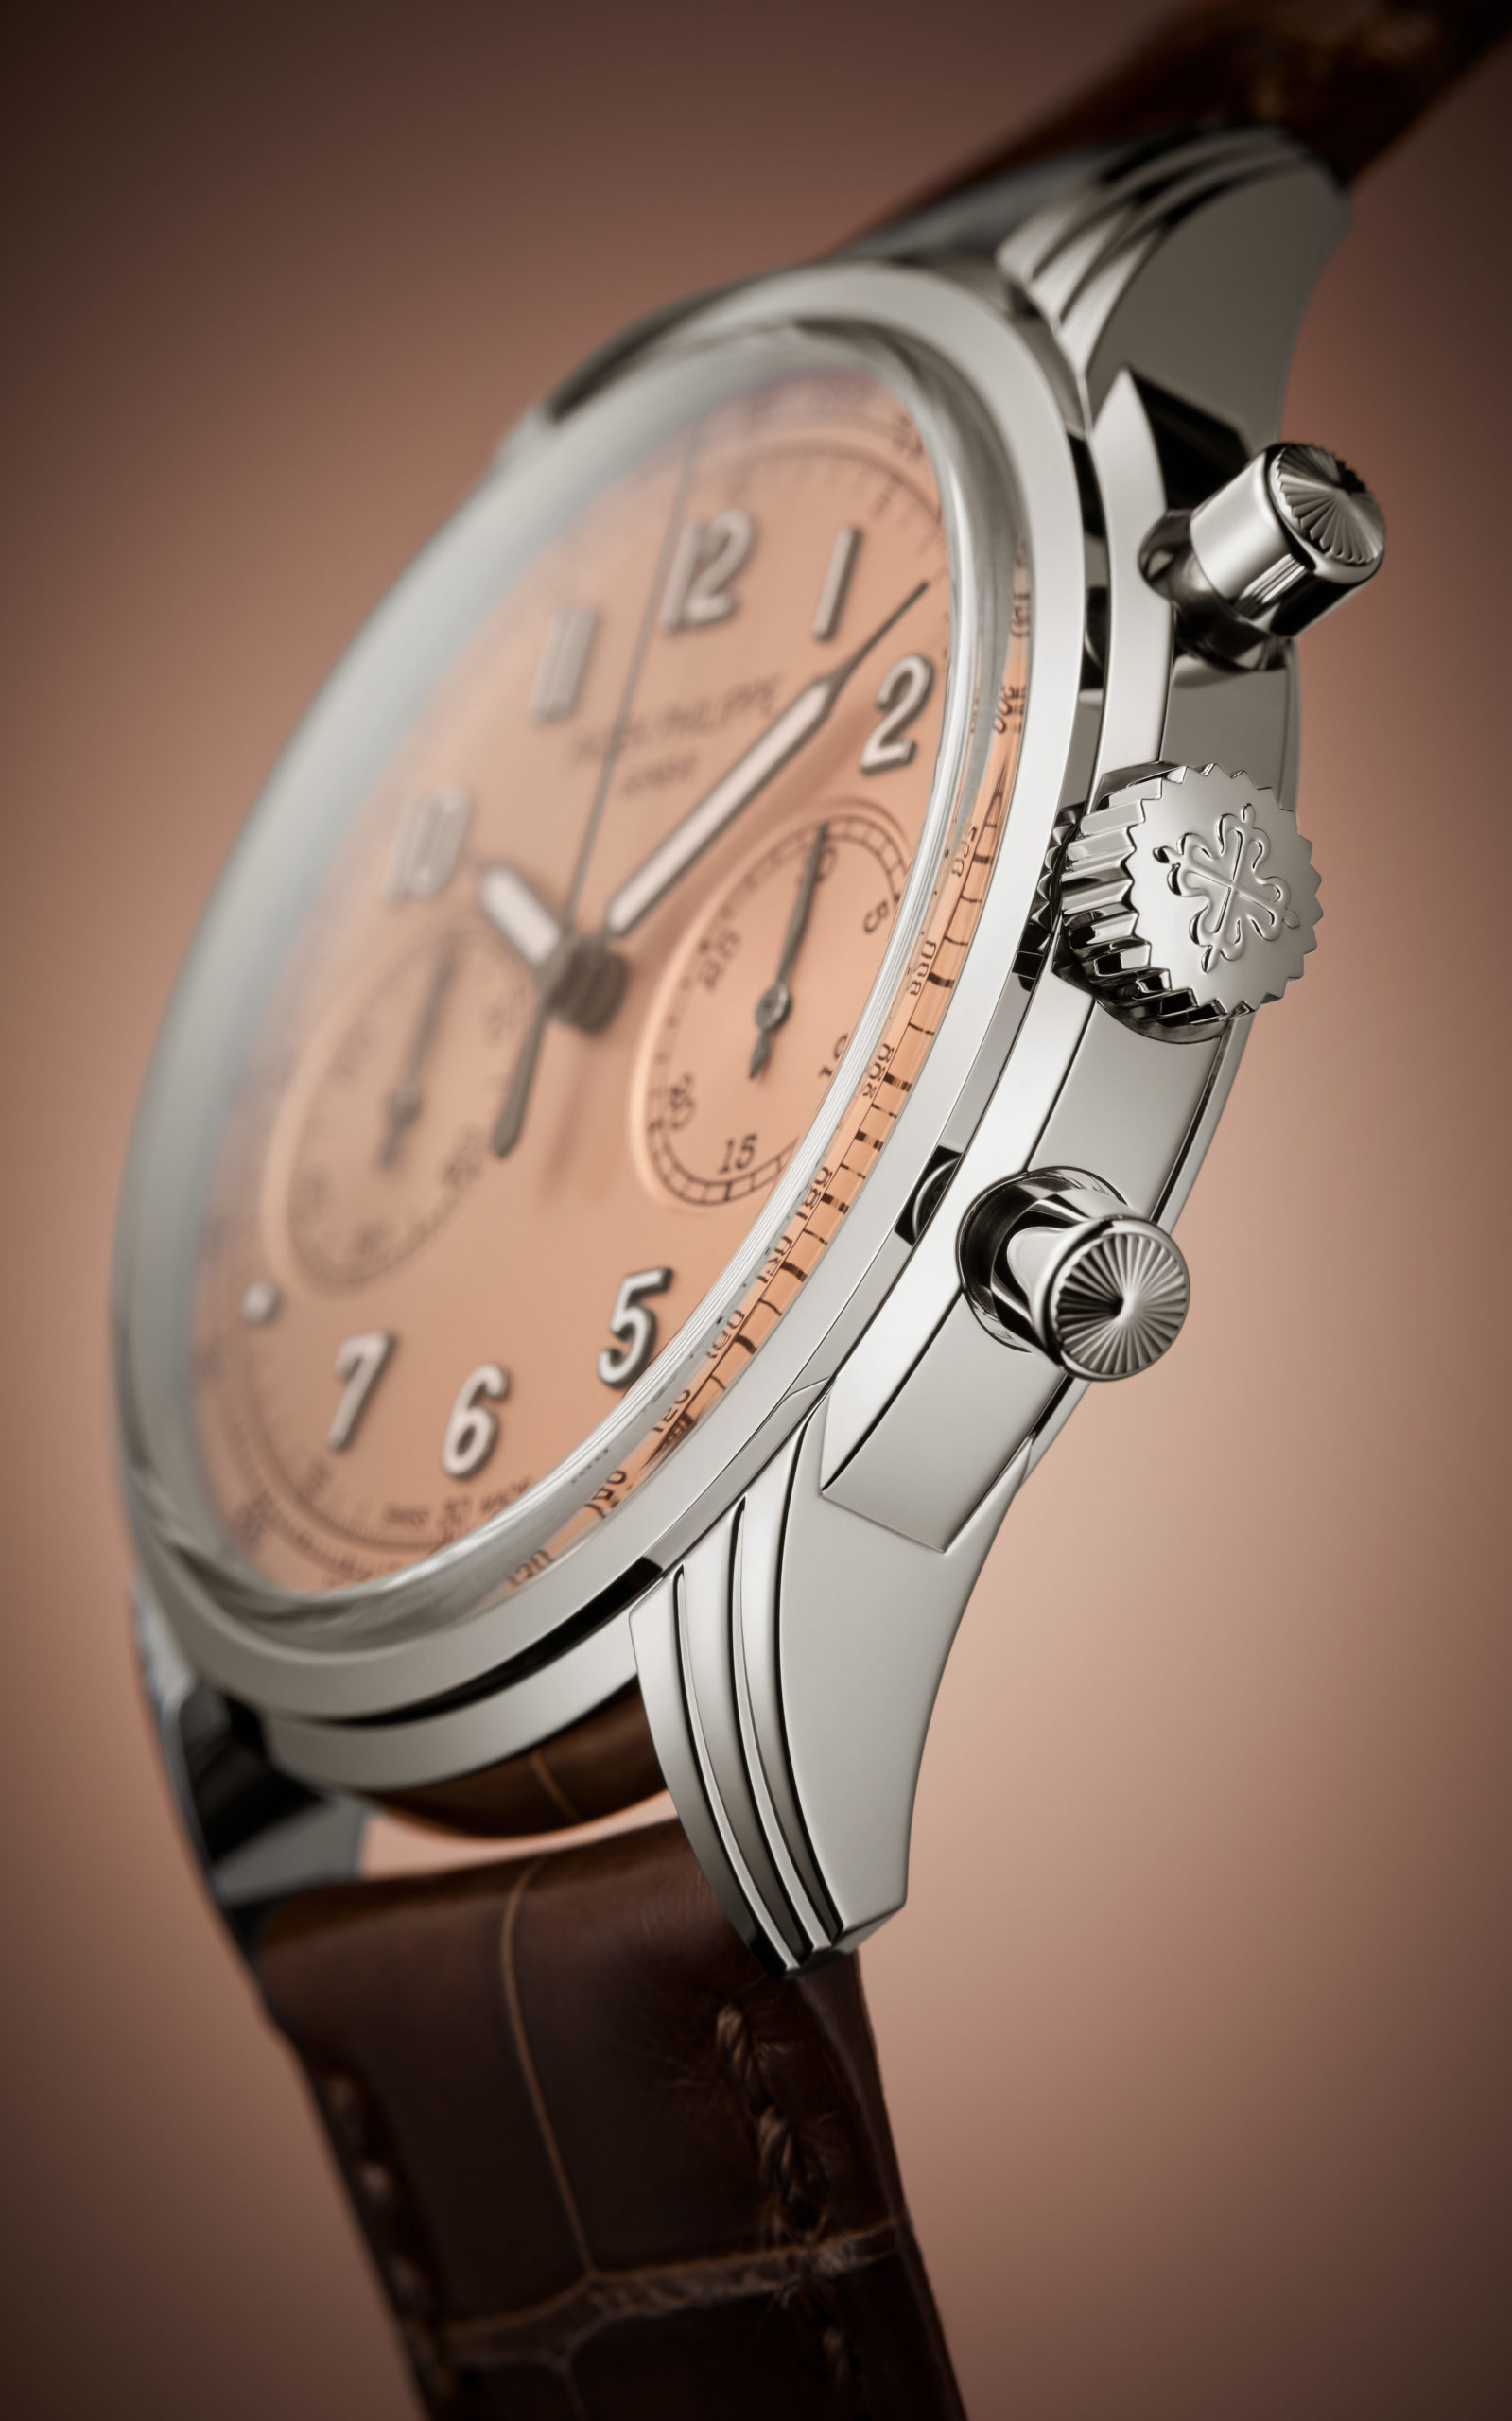 Intriguing Combination: Salmon Meets White Gold in Patek Philippe’s Ref. 5712